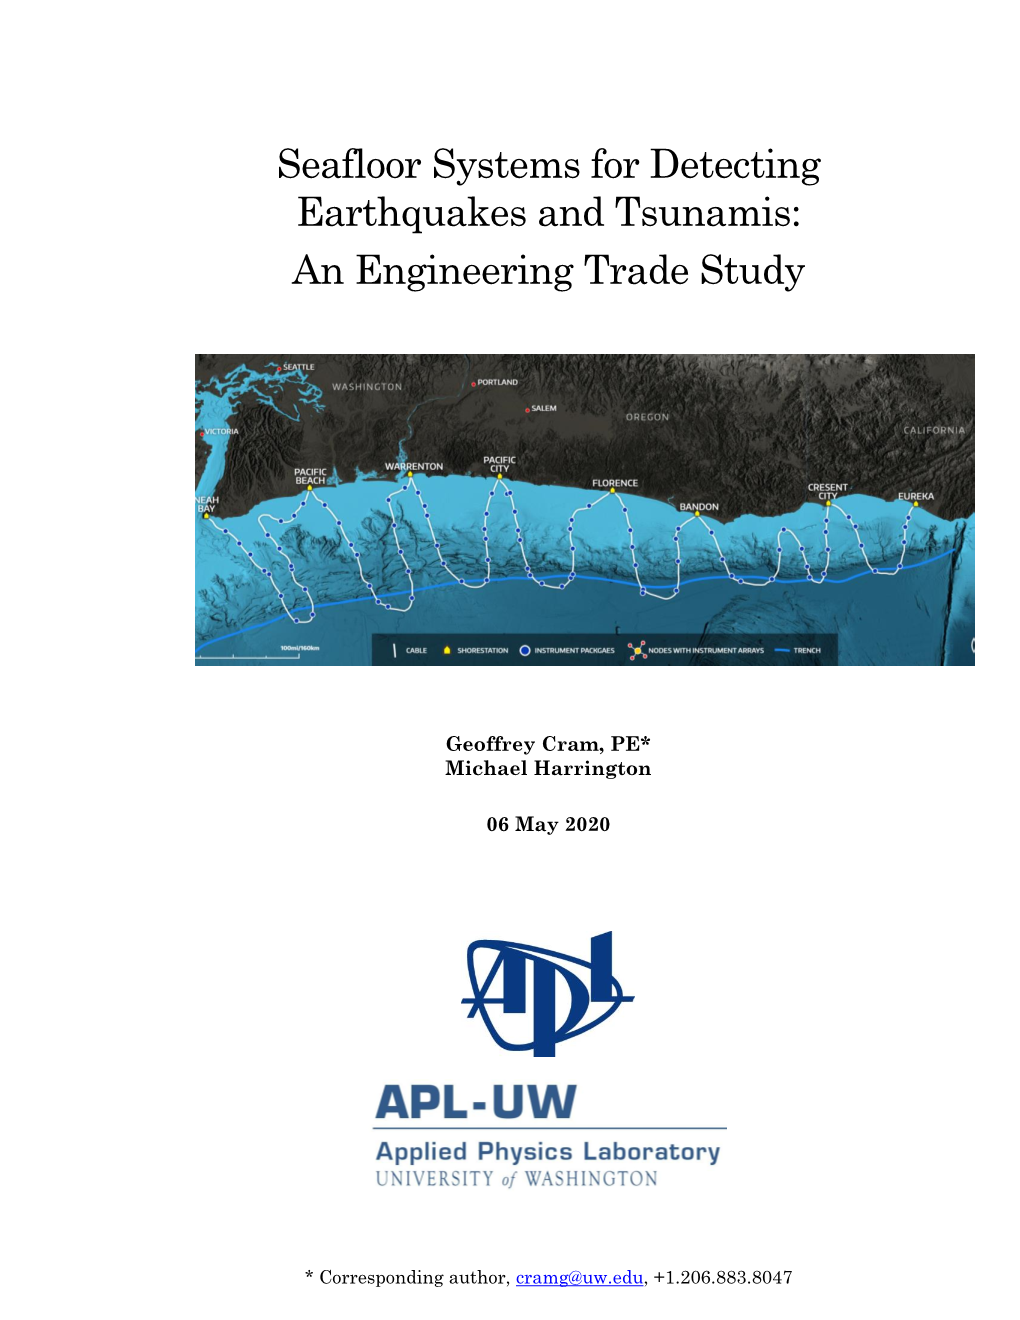 Seafloor Systems for Detecting Earthquakes and Tsunamis: an Engineering Trade Study